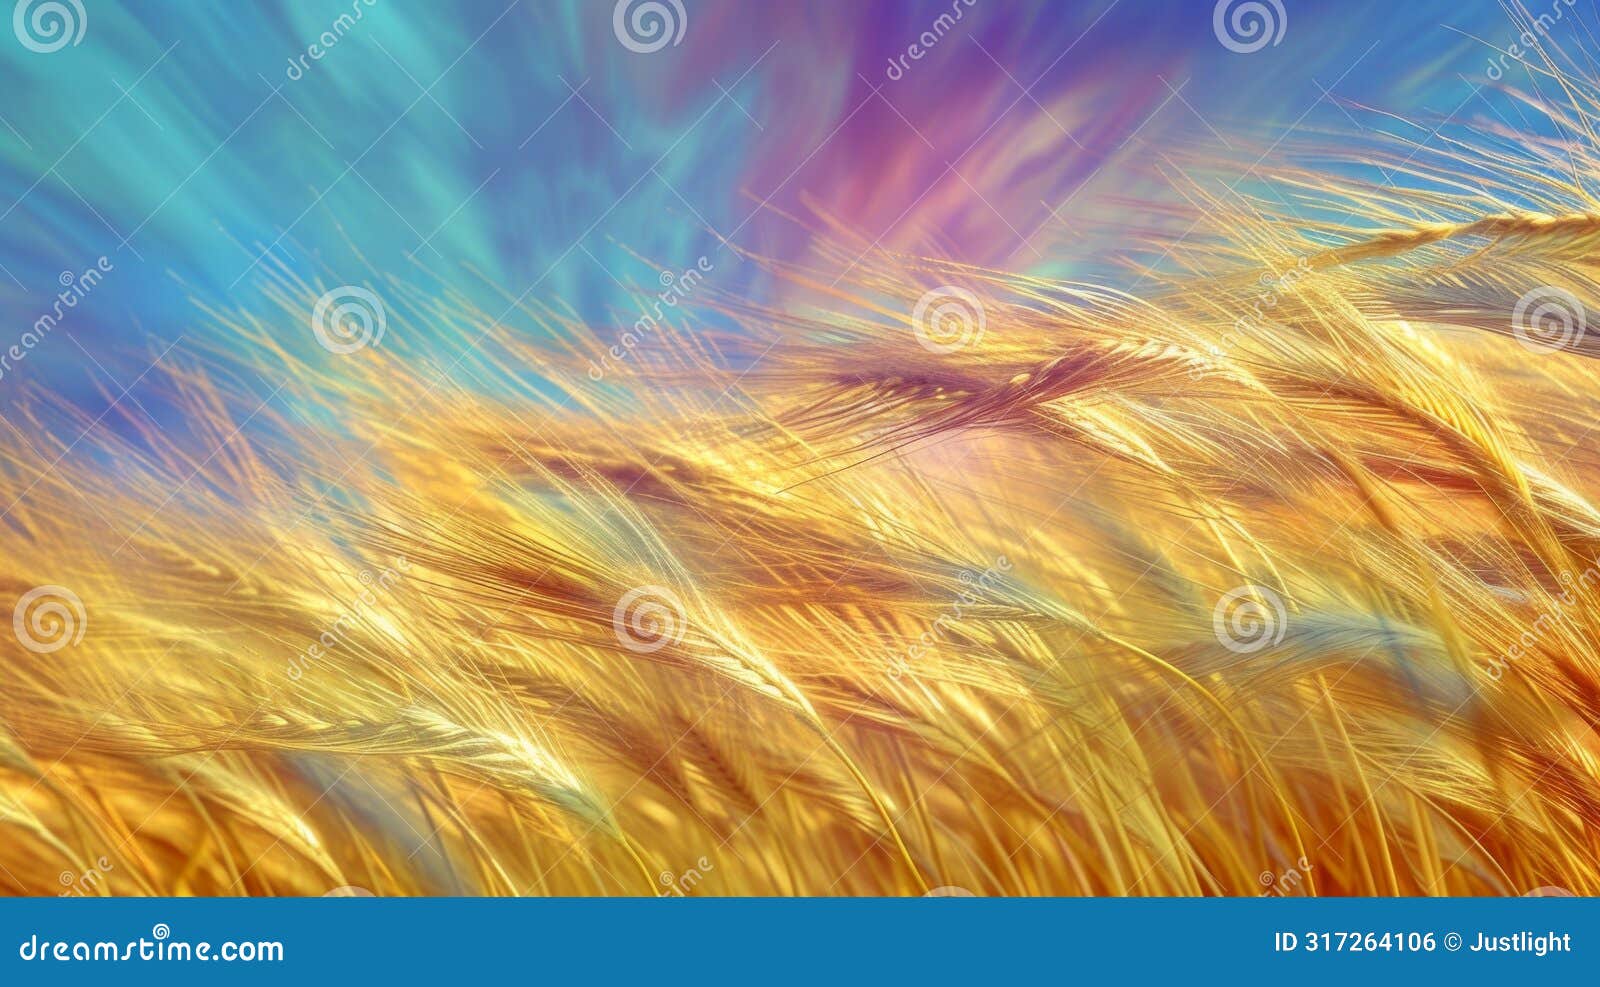 a hypnotizing display of wheat synchronized in a mesmerizing dance that ebbs and flows with the winds gentle touch